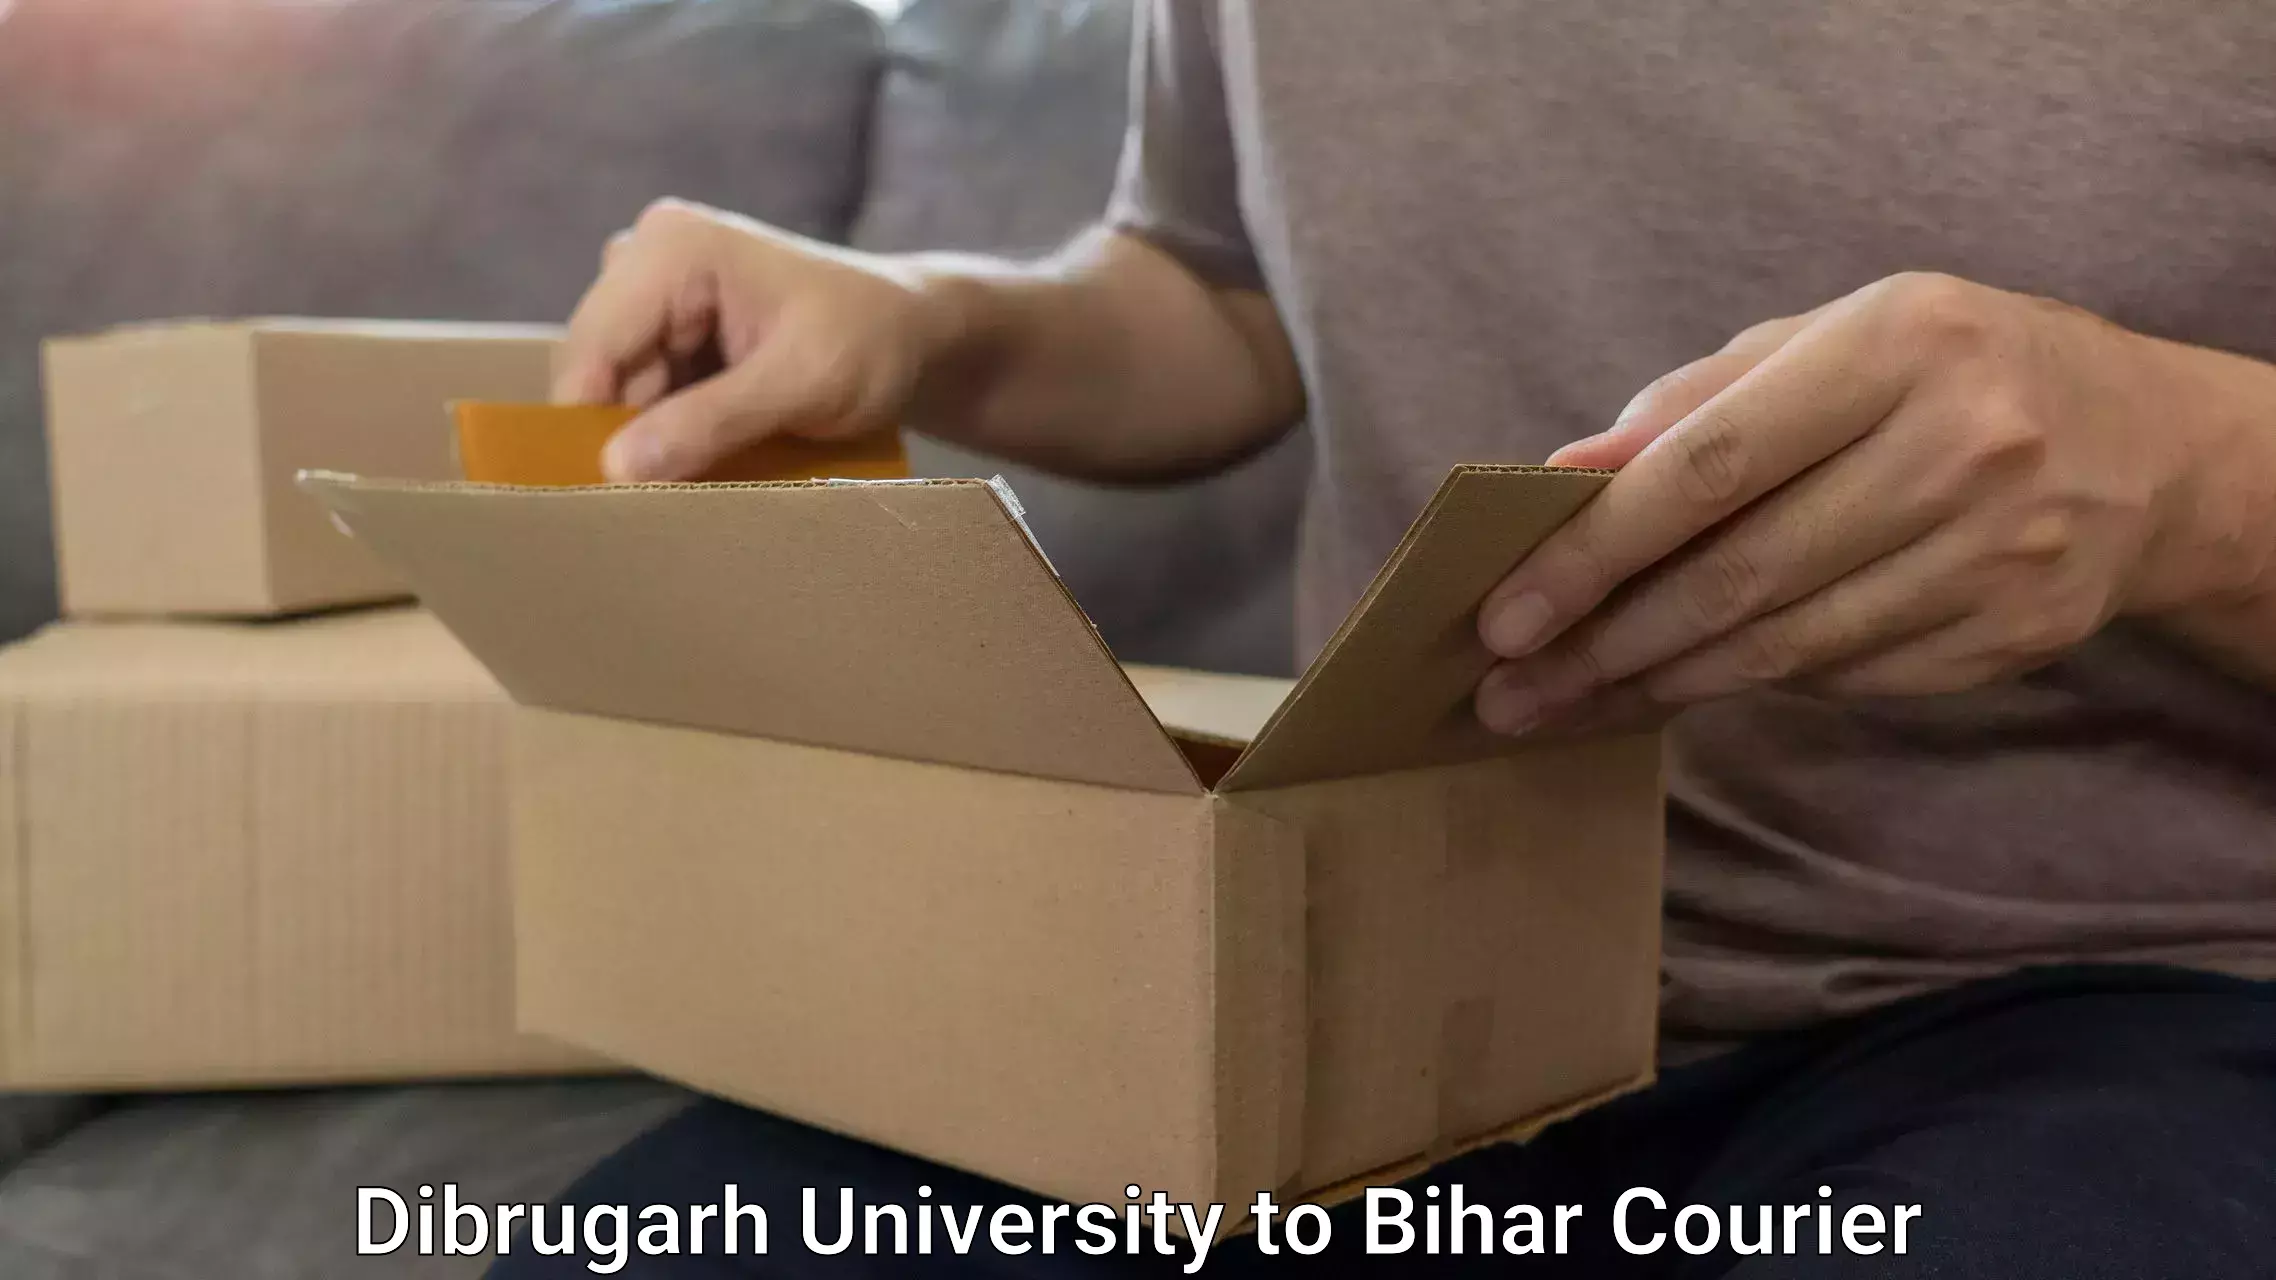 Luggage courier network Dibrugarh University to Singhia